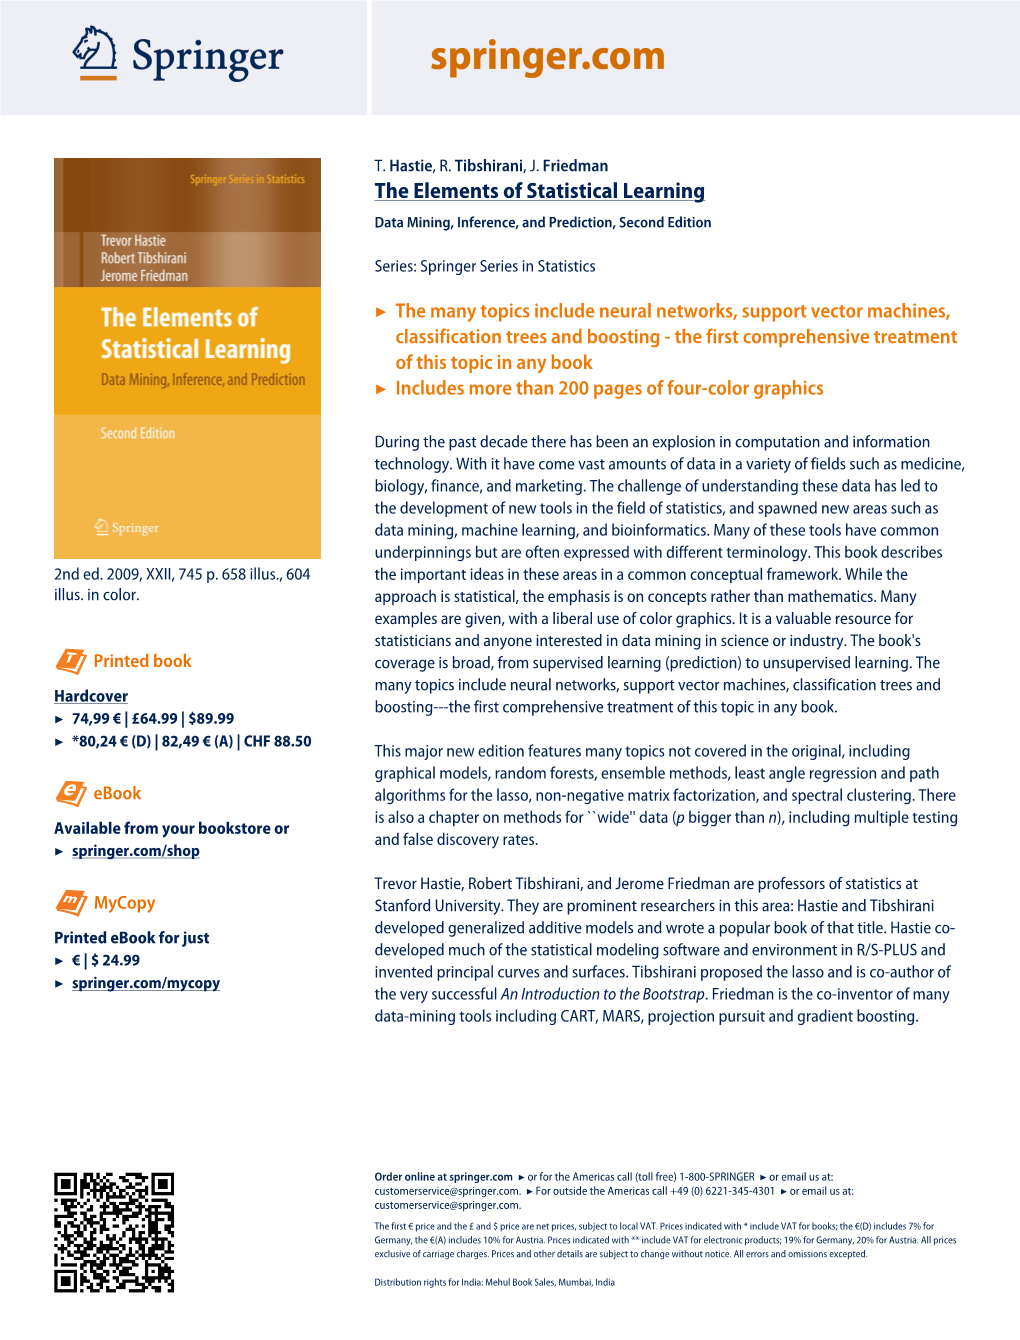 T. Hastie, R. Tibshirani, J. Friedman the Elements of Statistical Learning Data Mining, Inference, and Prediction, Second Edition